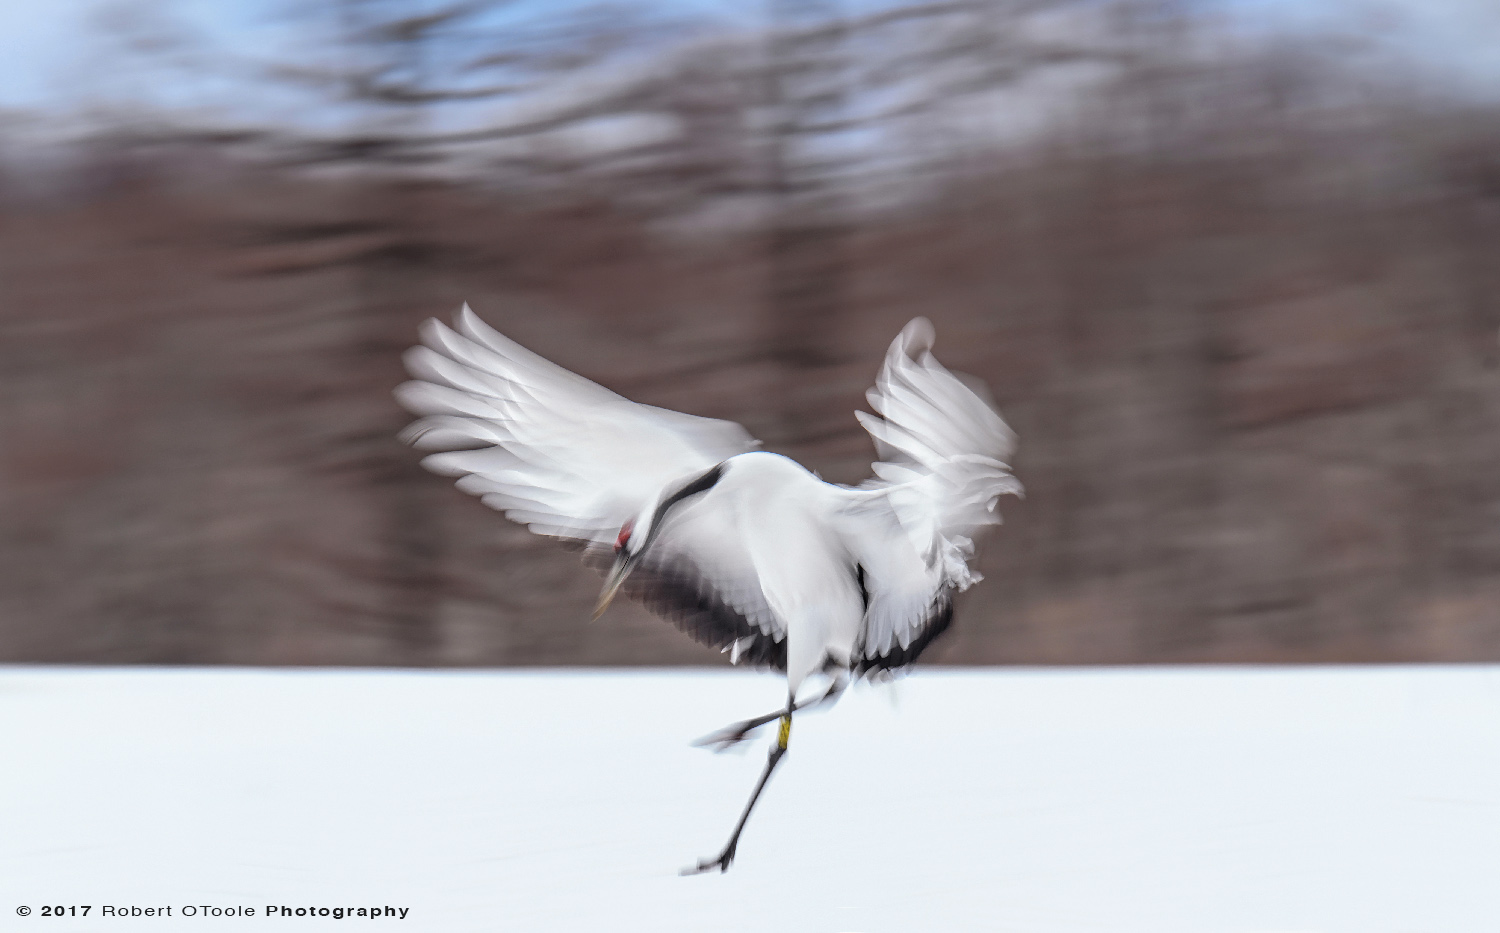 Japanese Red-Crowned Crane Landing at 1/20th S